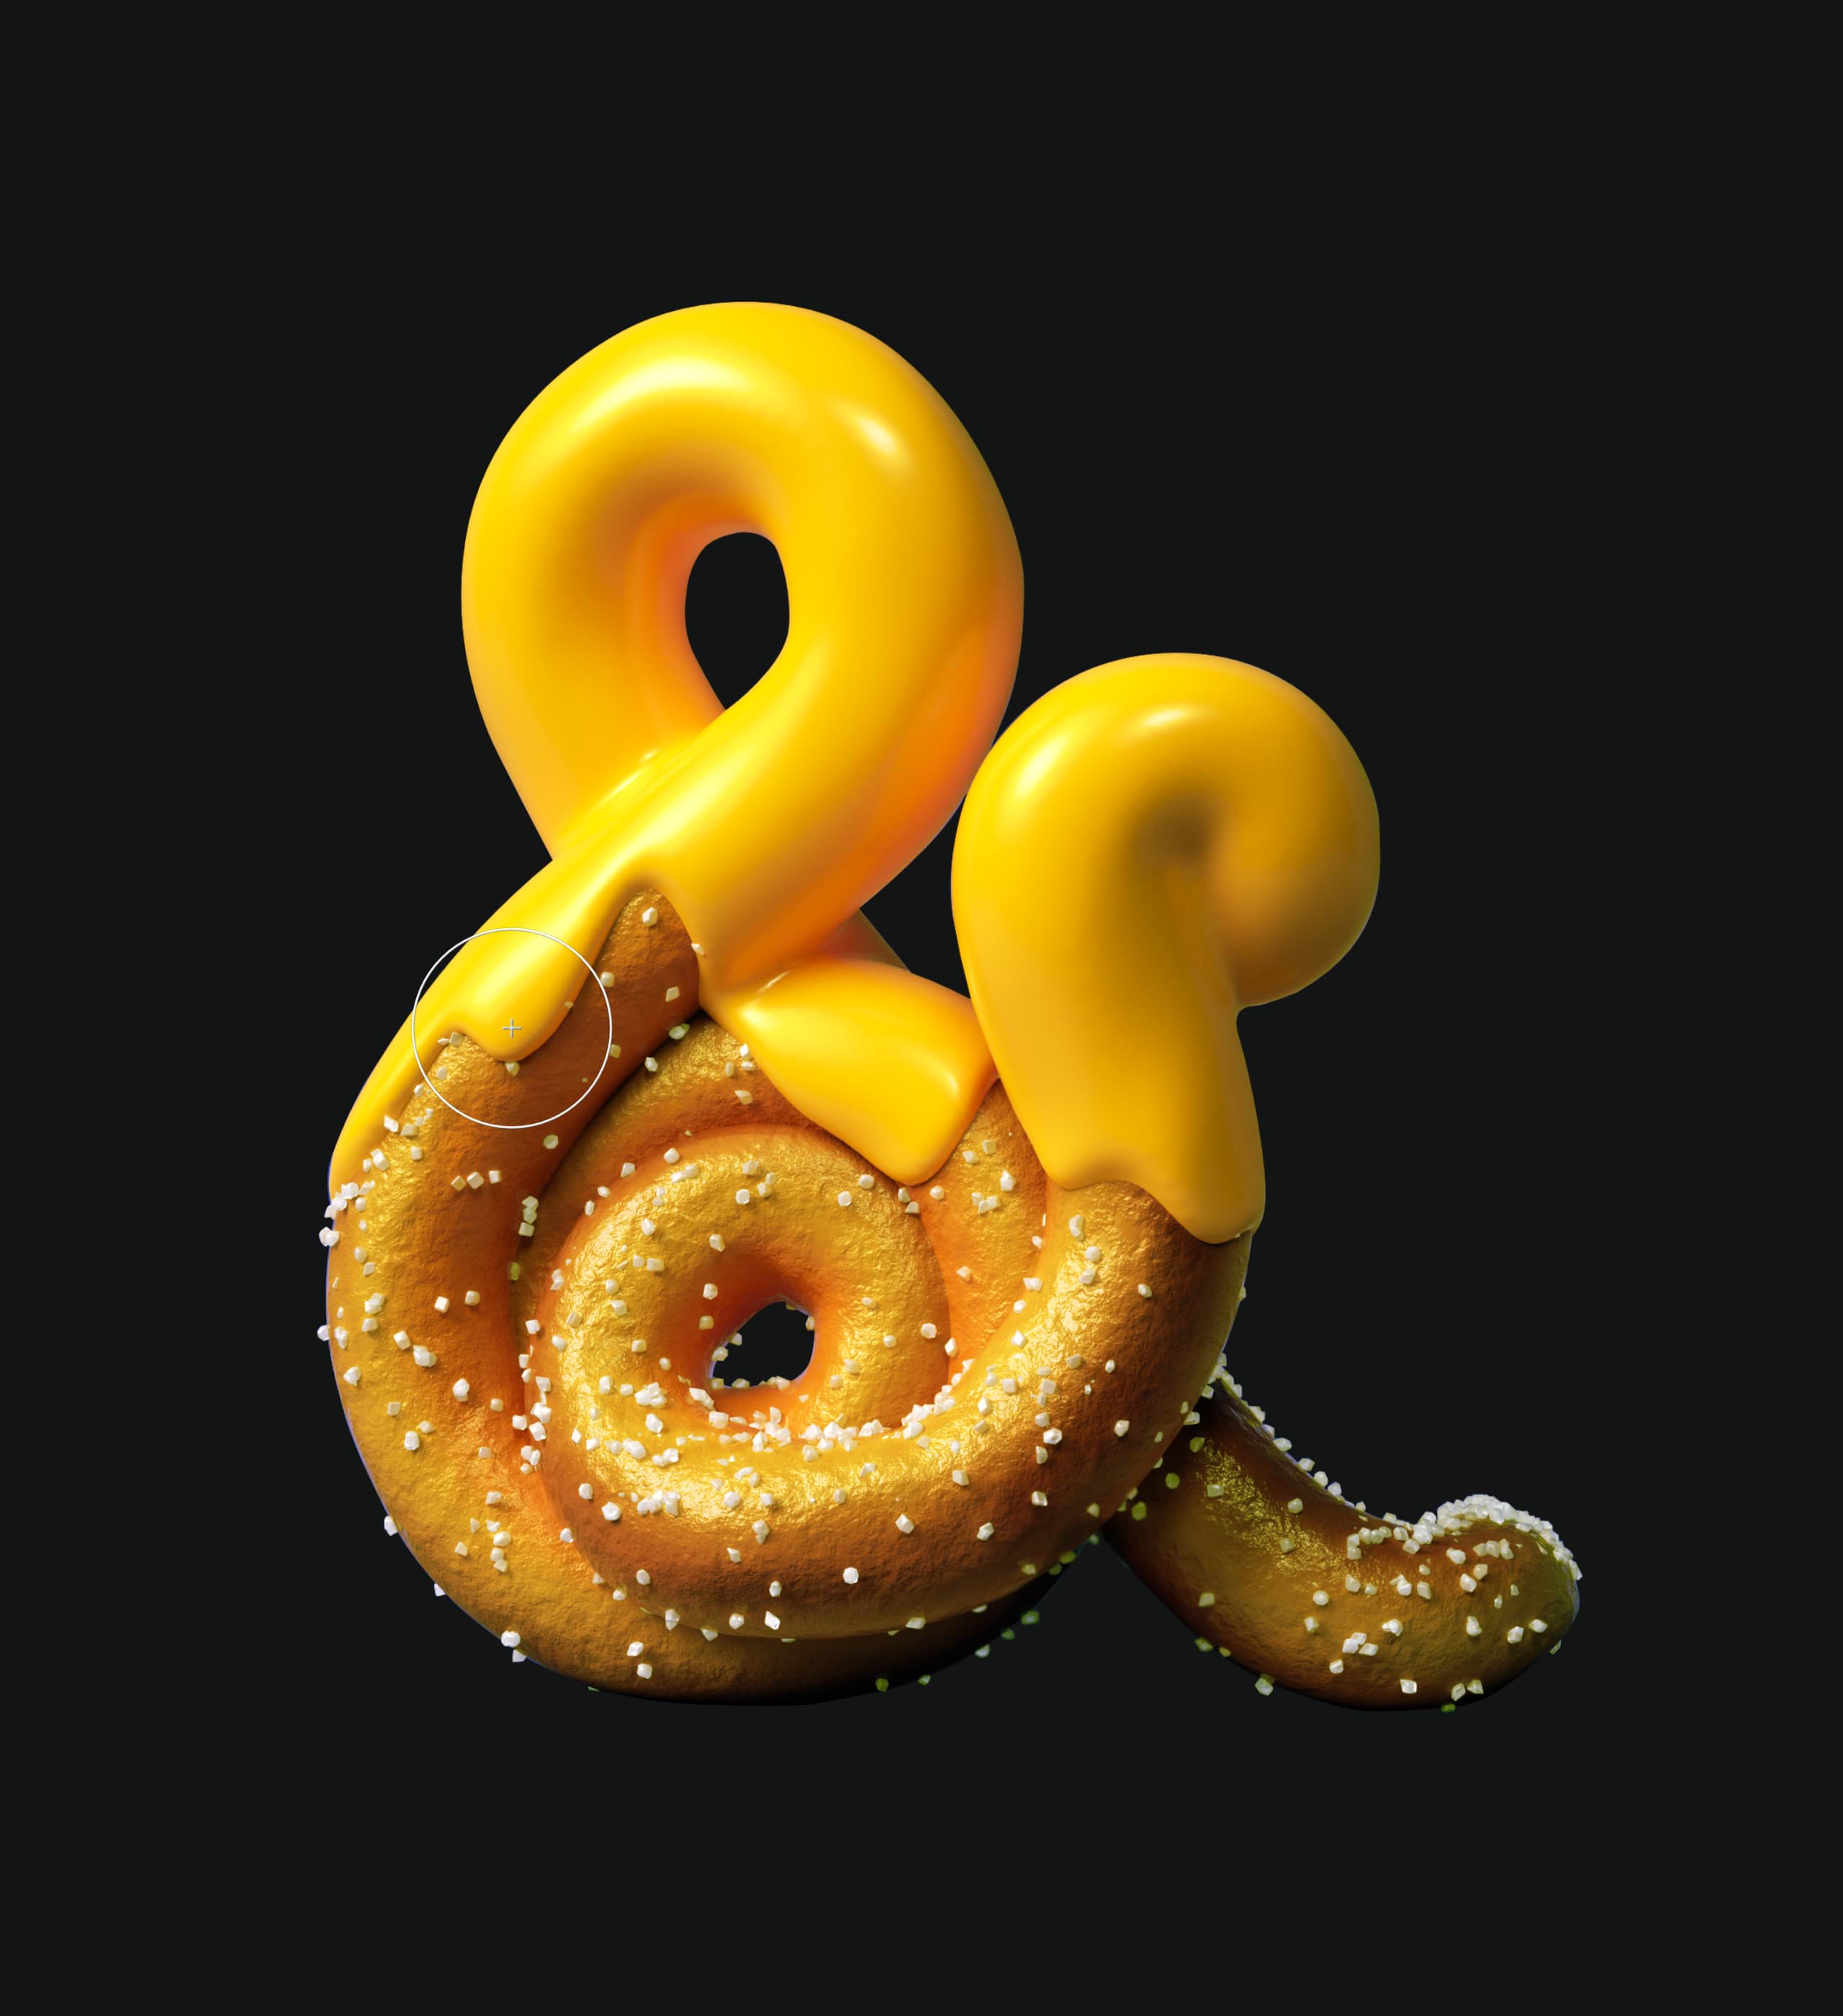 Giant pretzel twisted into an ampersand sign, top half covered in melted yellow cheese, with tool panels open on either side